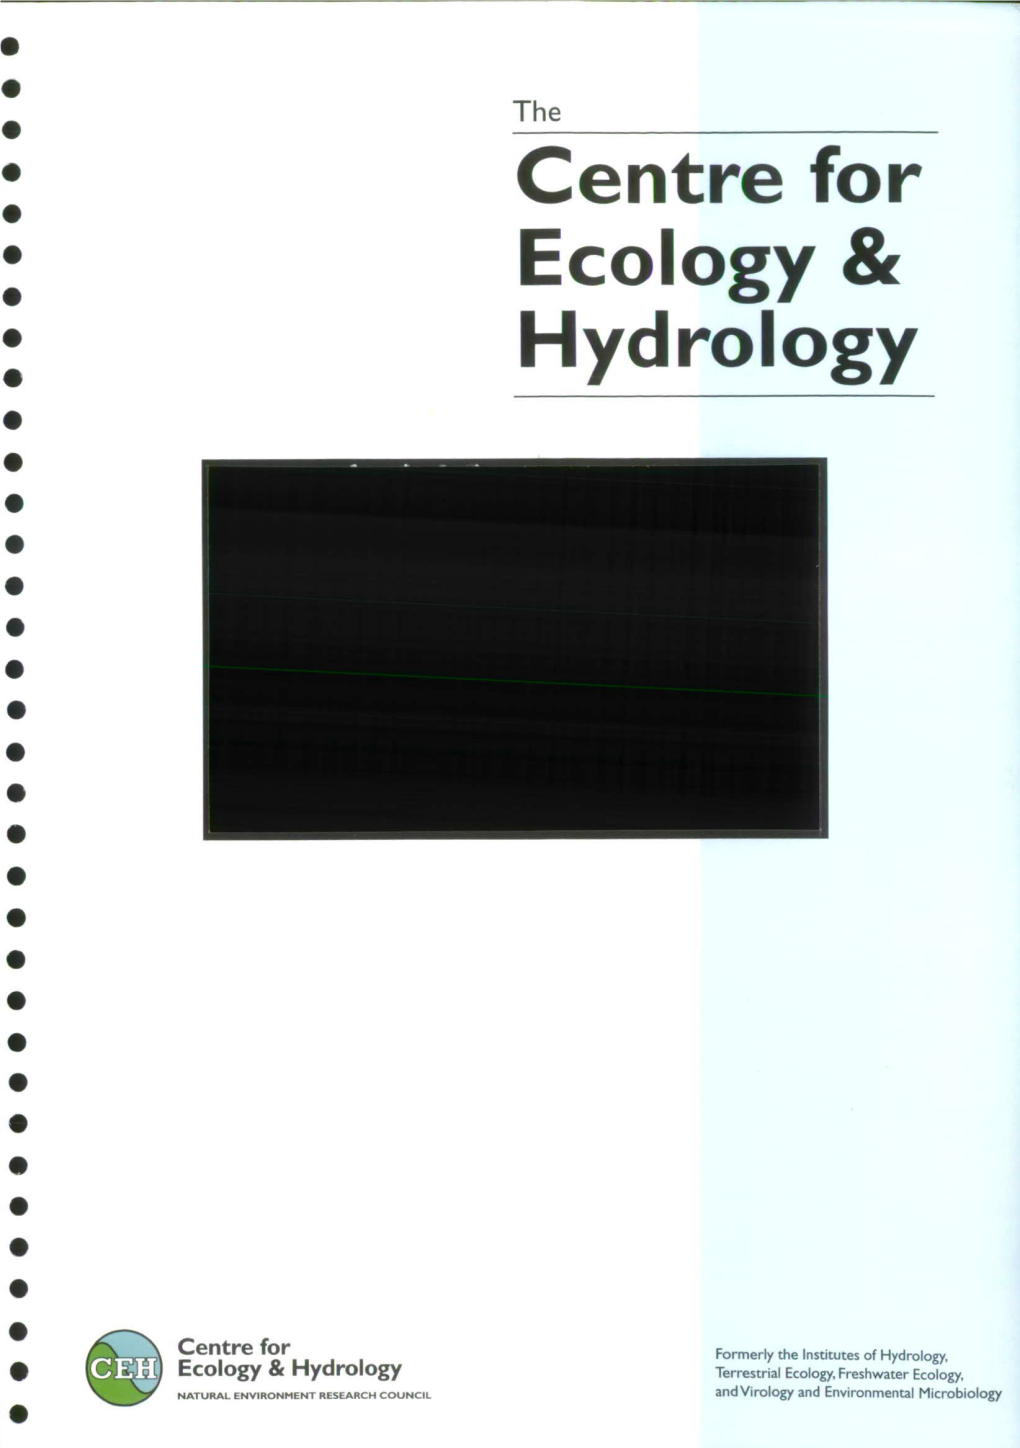 Centre for Ecology & Hydrology